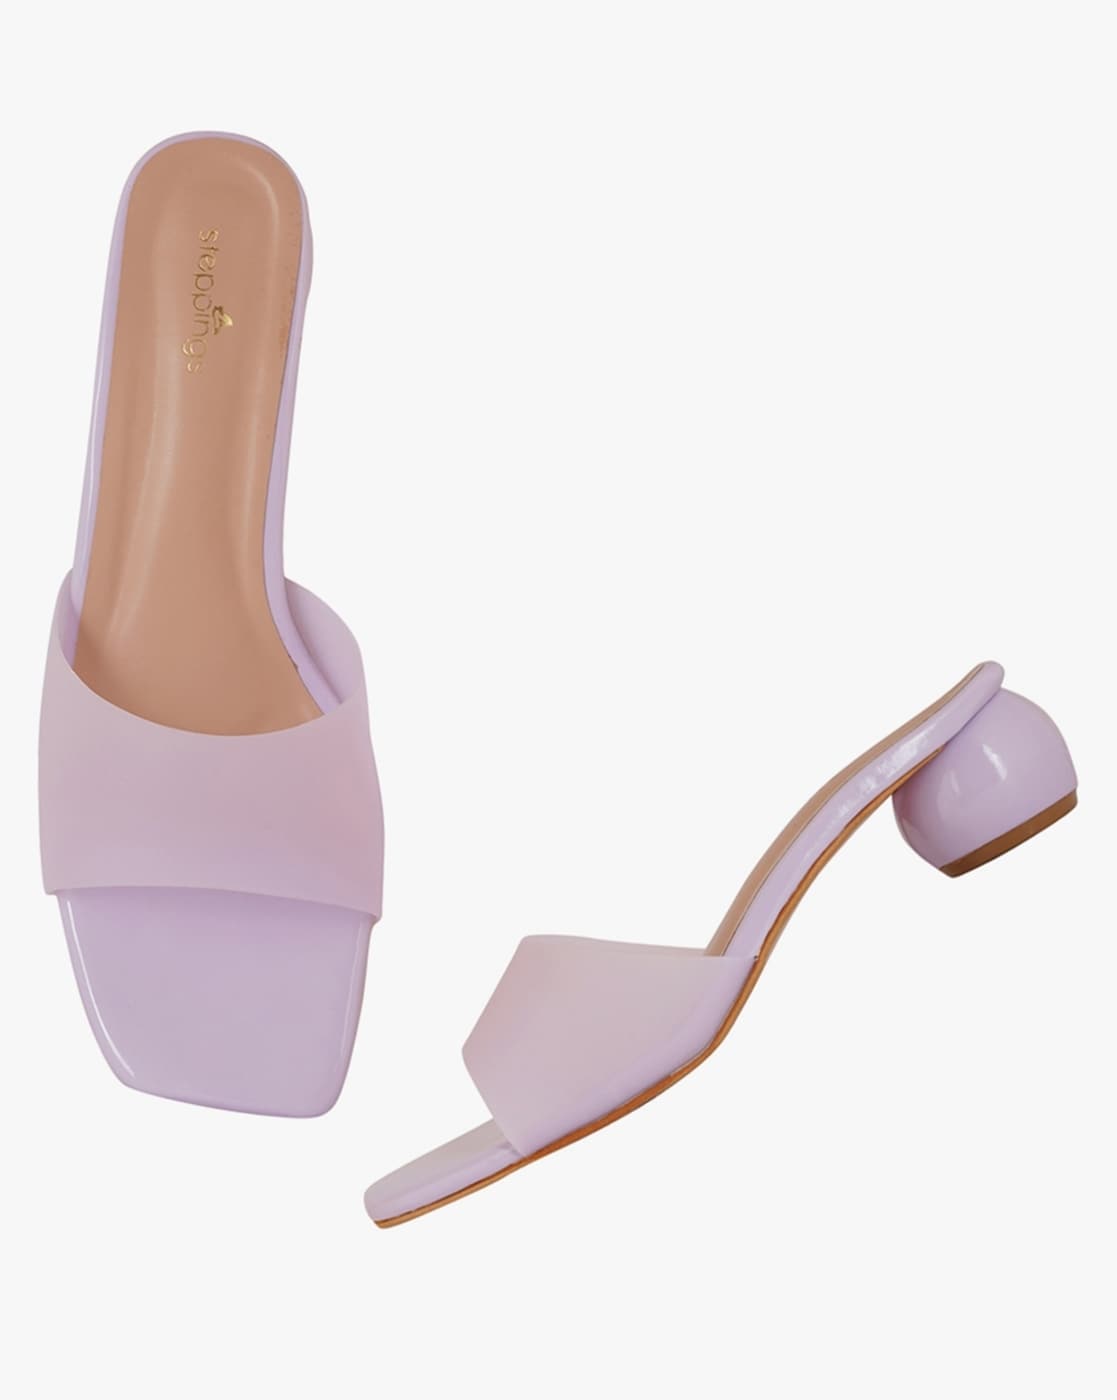 24 Most Comfortable Bridal Shoes to Say 